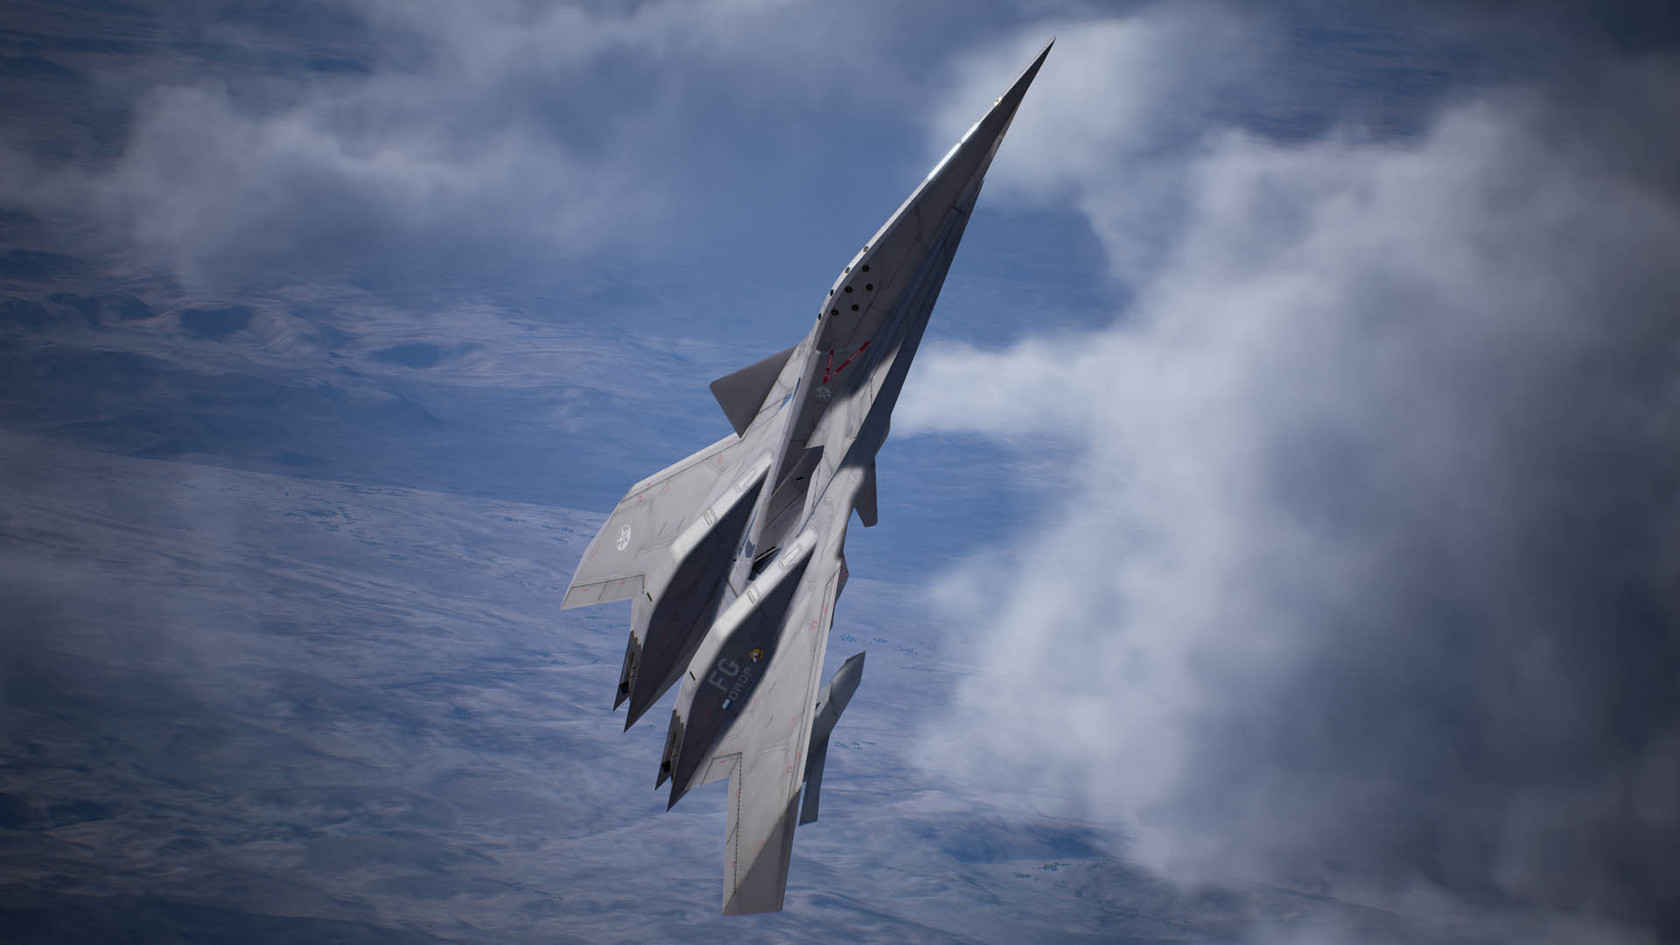 Ace Combat 7 Skies Unknown REVIEW: Flight simulation soars with